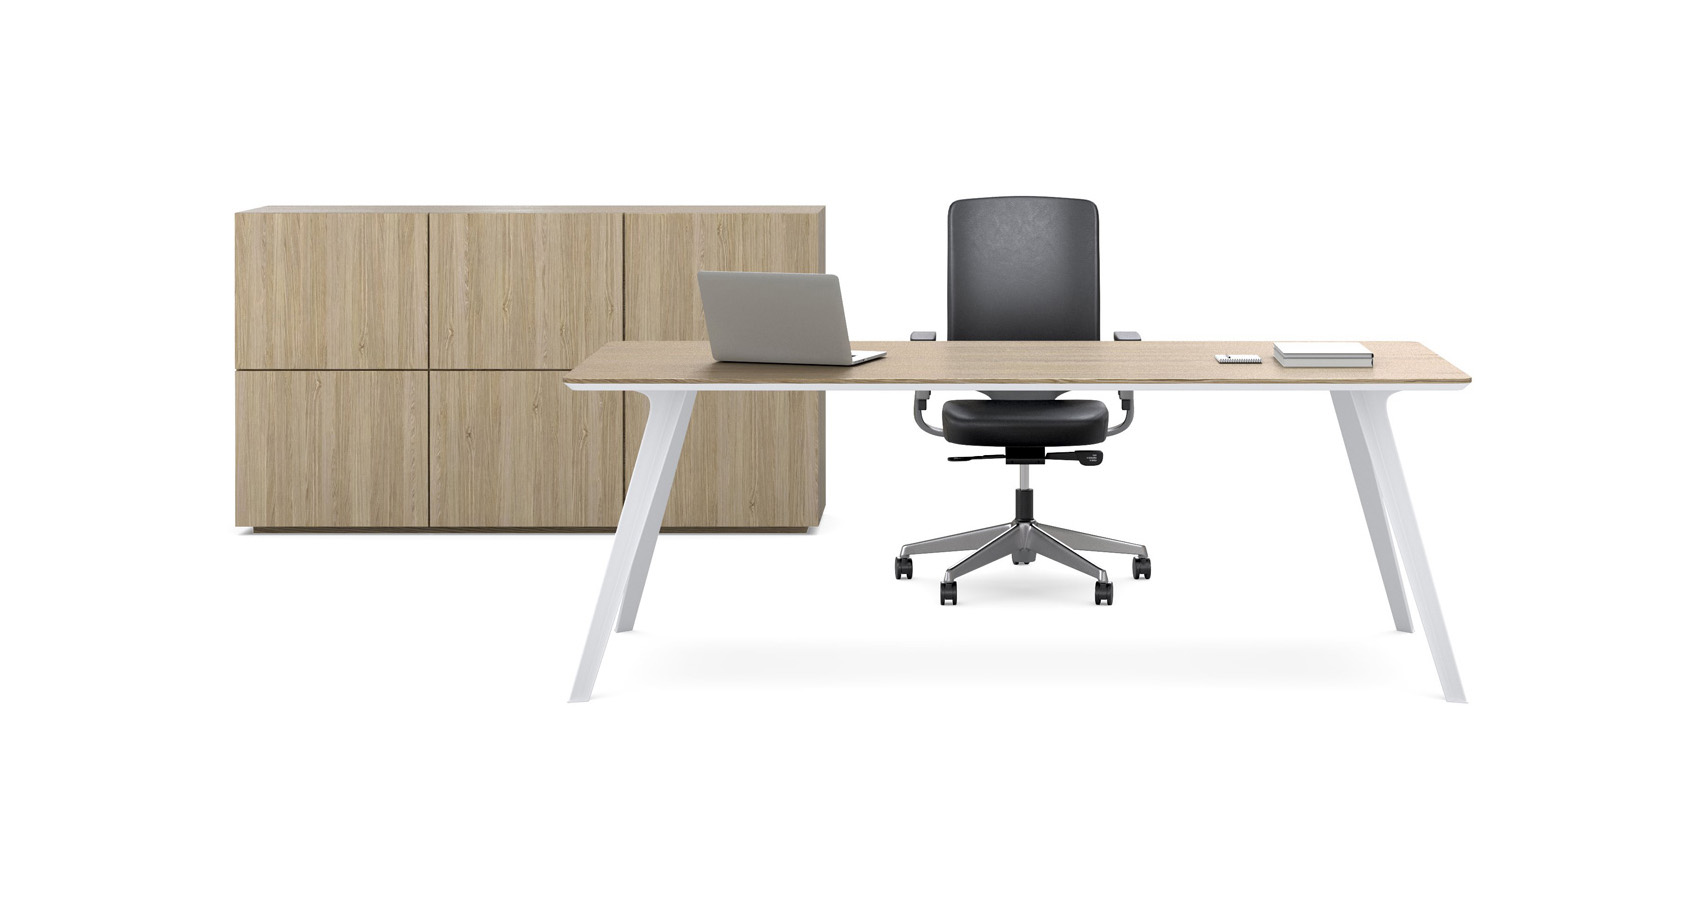 Dart Executive Desk with Dart Confence Table, Miro Chairs and Push Storage